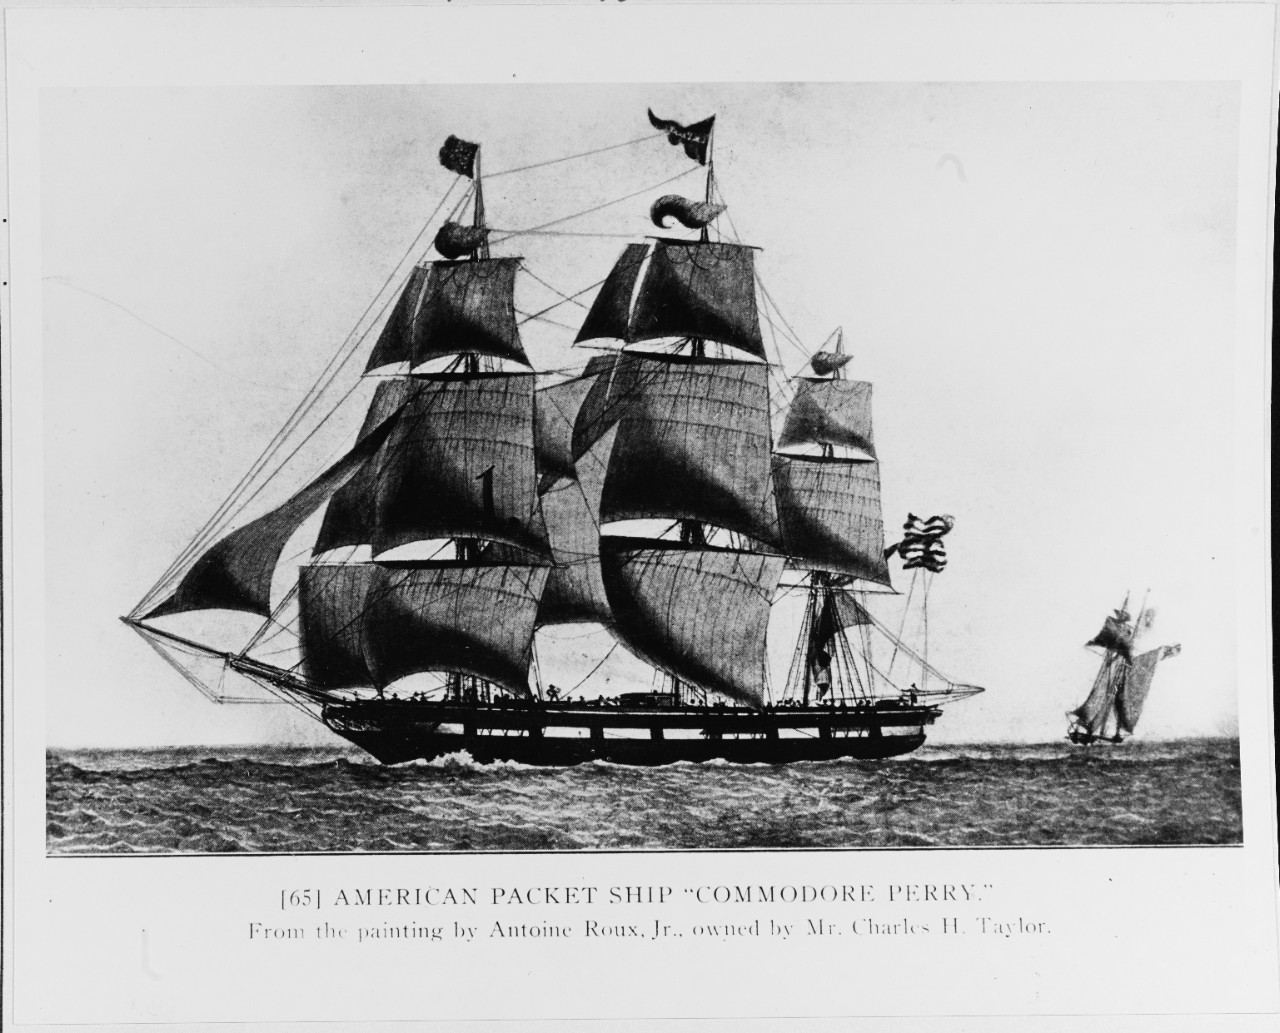 "COMMODORE PERRY"